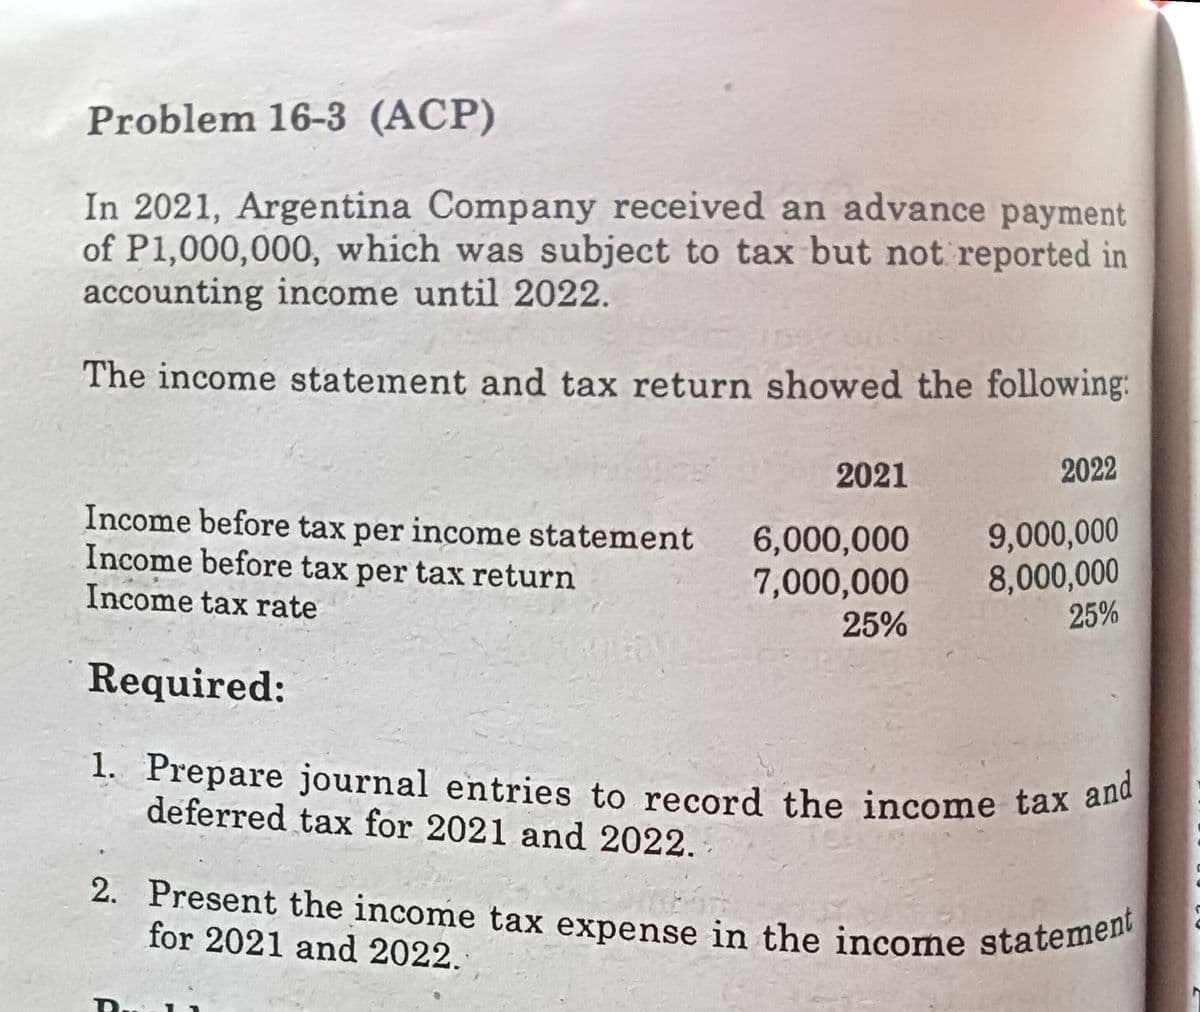 1. Prepare journal entries to record the income tax and
2. Present the income tax expense in the income statement
Problem 16-3 (ACP)
In 2021, Argentina Company received an advance payment
of P1,000,000, which was subject to tax but not reported in
accounting income until 2022.
The income statement and tax return showed the following:
2021
2022
Income before tax per income statement
Income before tax per tax return
Income tax rate
6,000,000
7,000,000
9,000,000
8,000,000
25%
25%
Required:
1. Prepare journal entries to record the income tax a
deferred tax for 2021 and 2022.
for 2021 and 2022.
